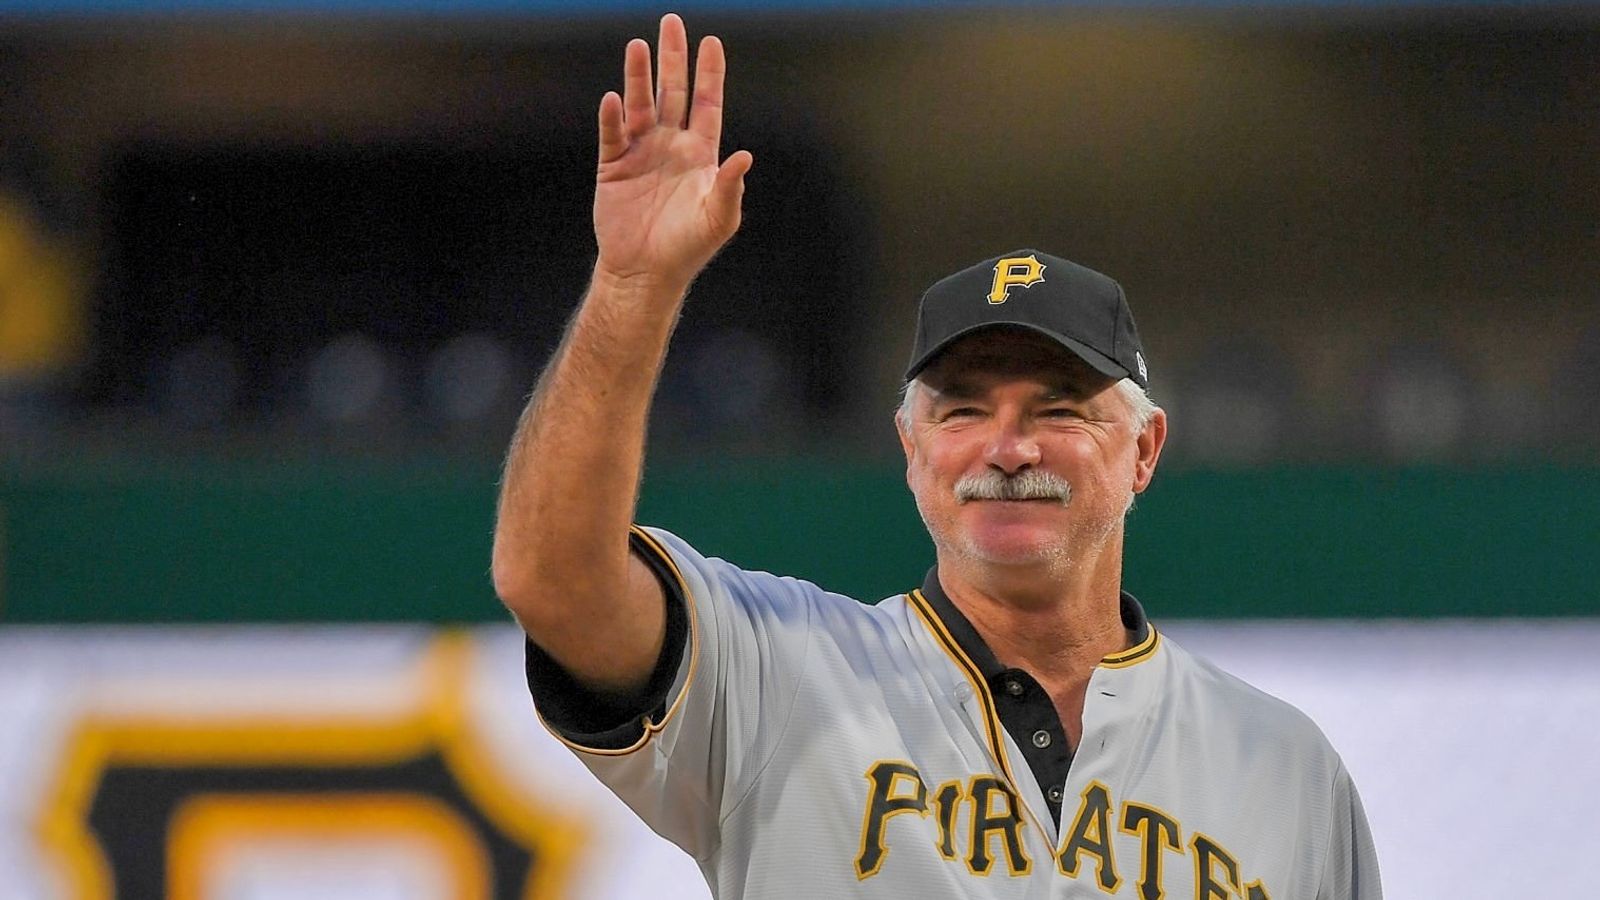 Always a good time here:' Doug Drabek reflects on Pirates career, '92 team